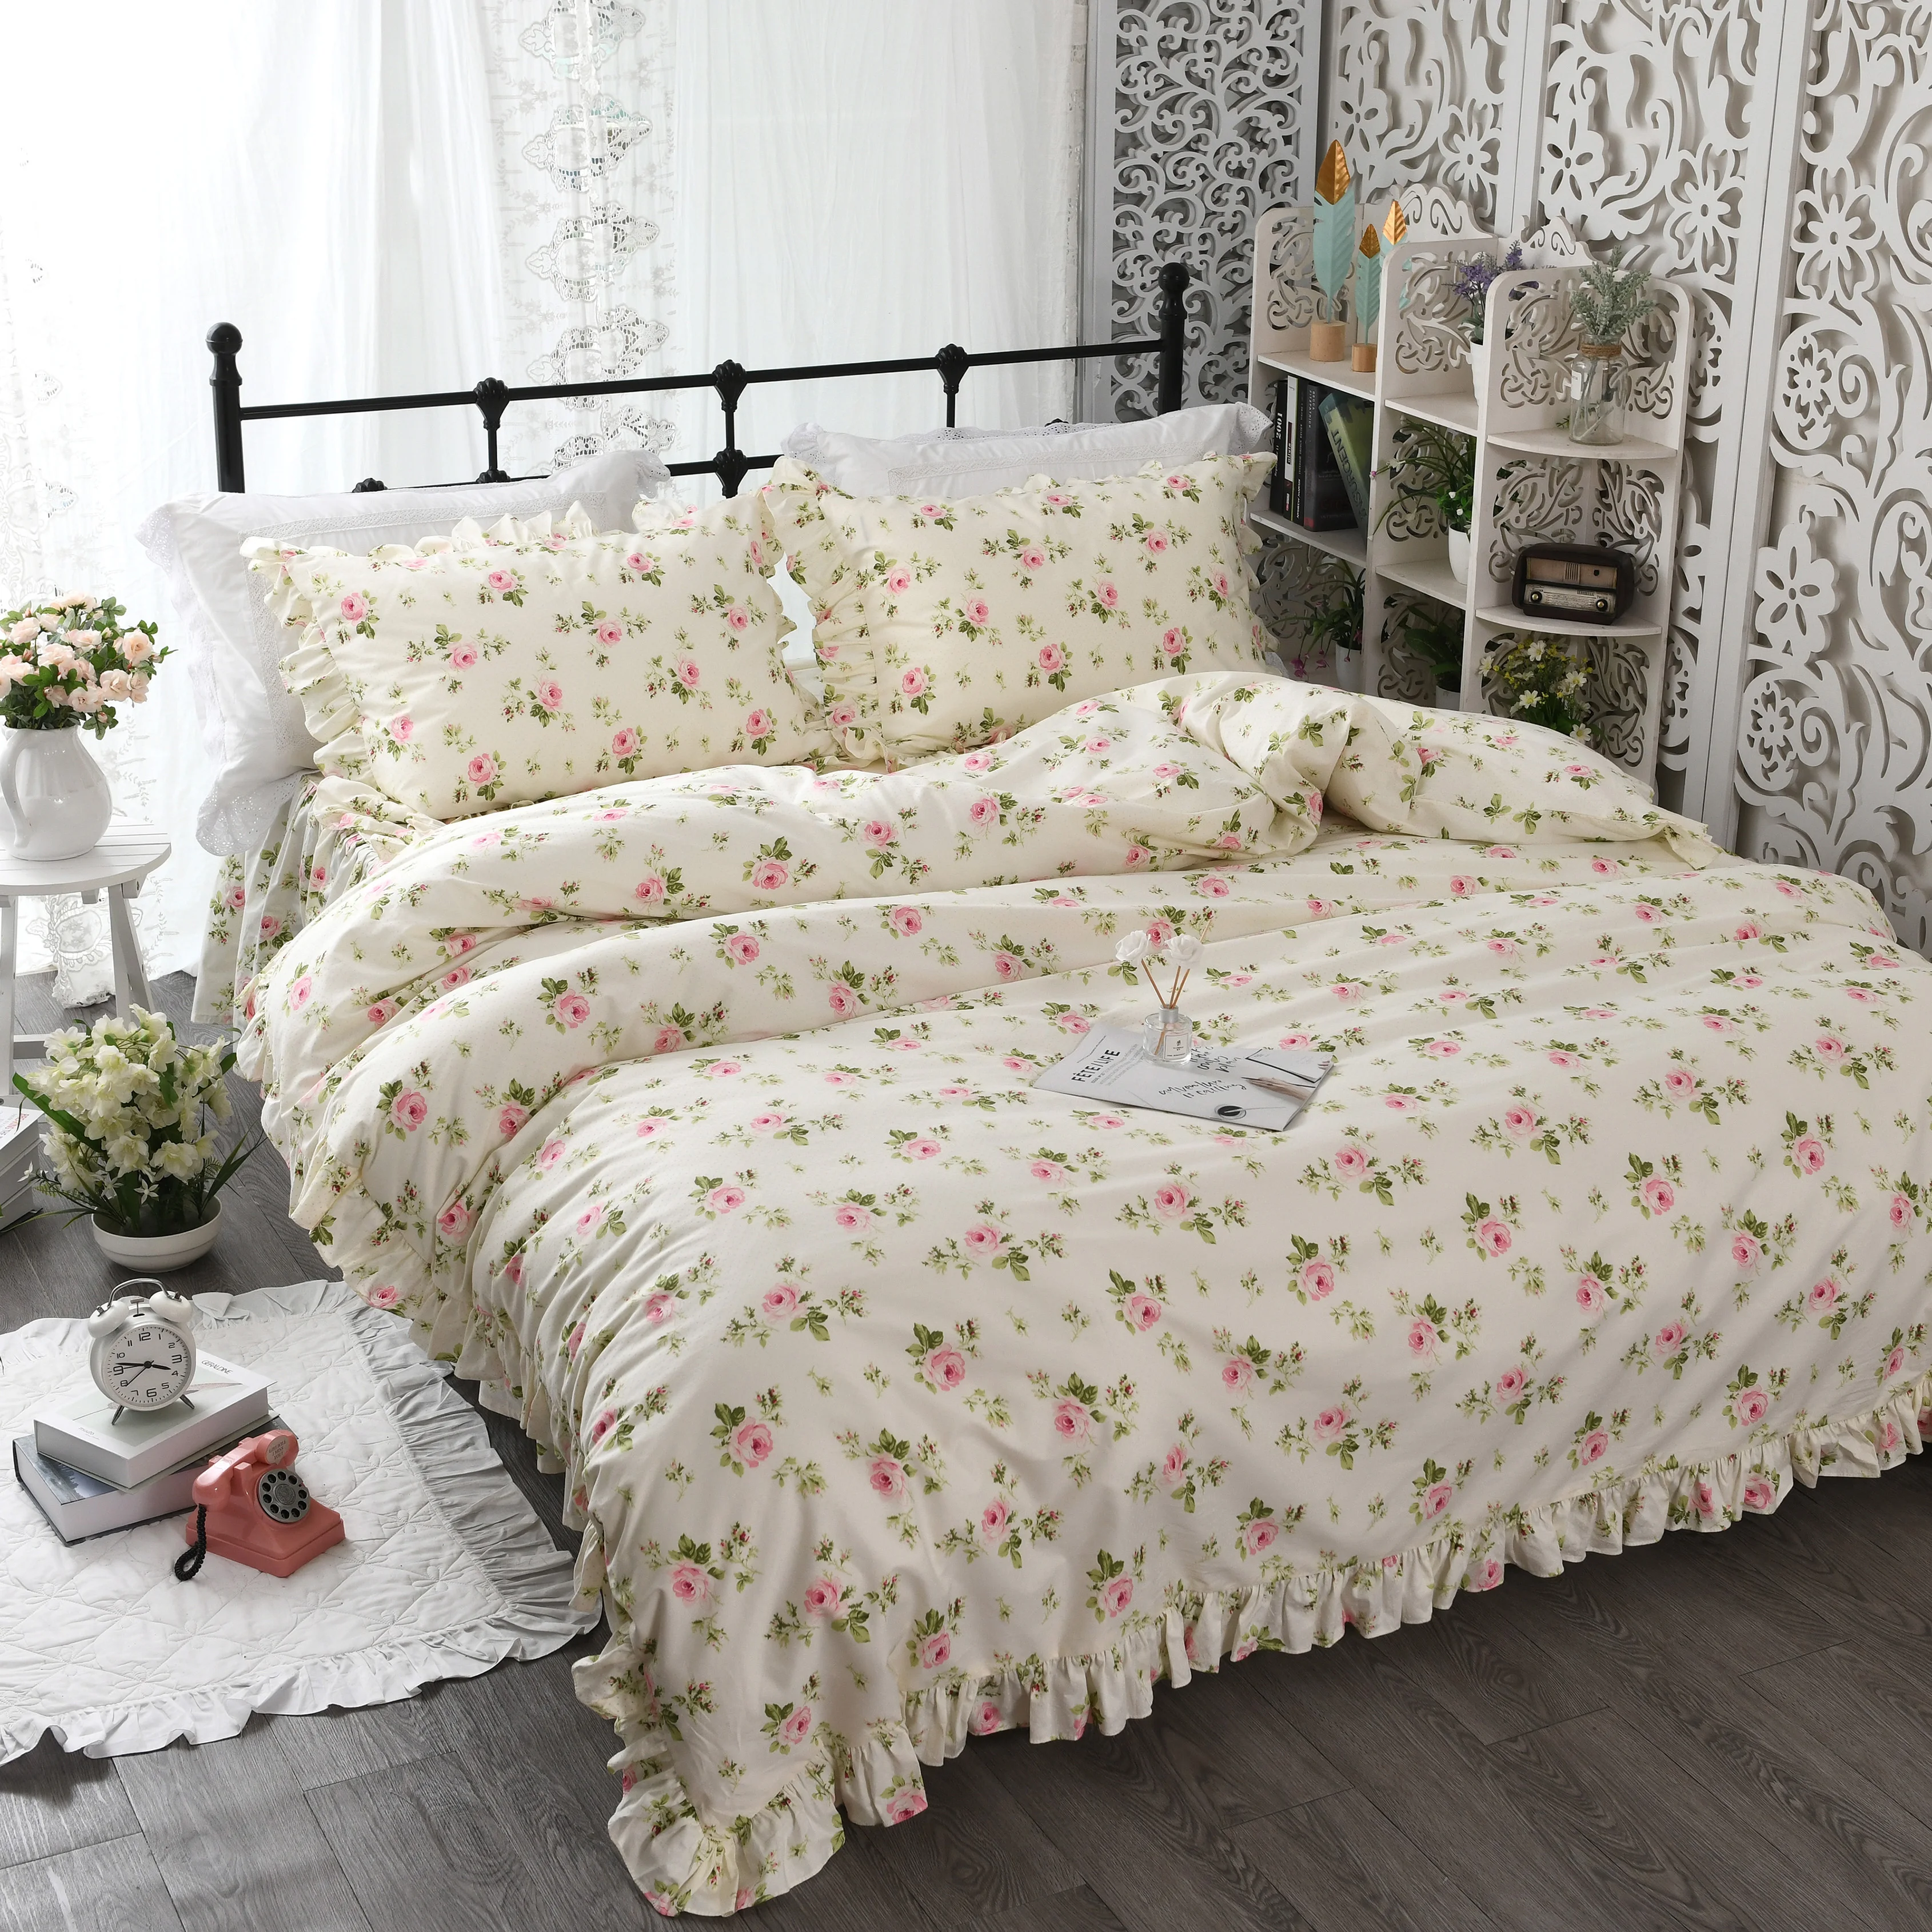 Cotton Flower Floral Bed Skirt Pillowcases Bedroom Bedding Full Queen King Size 